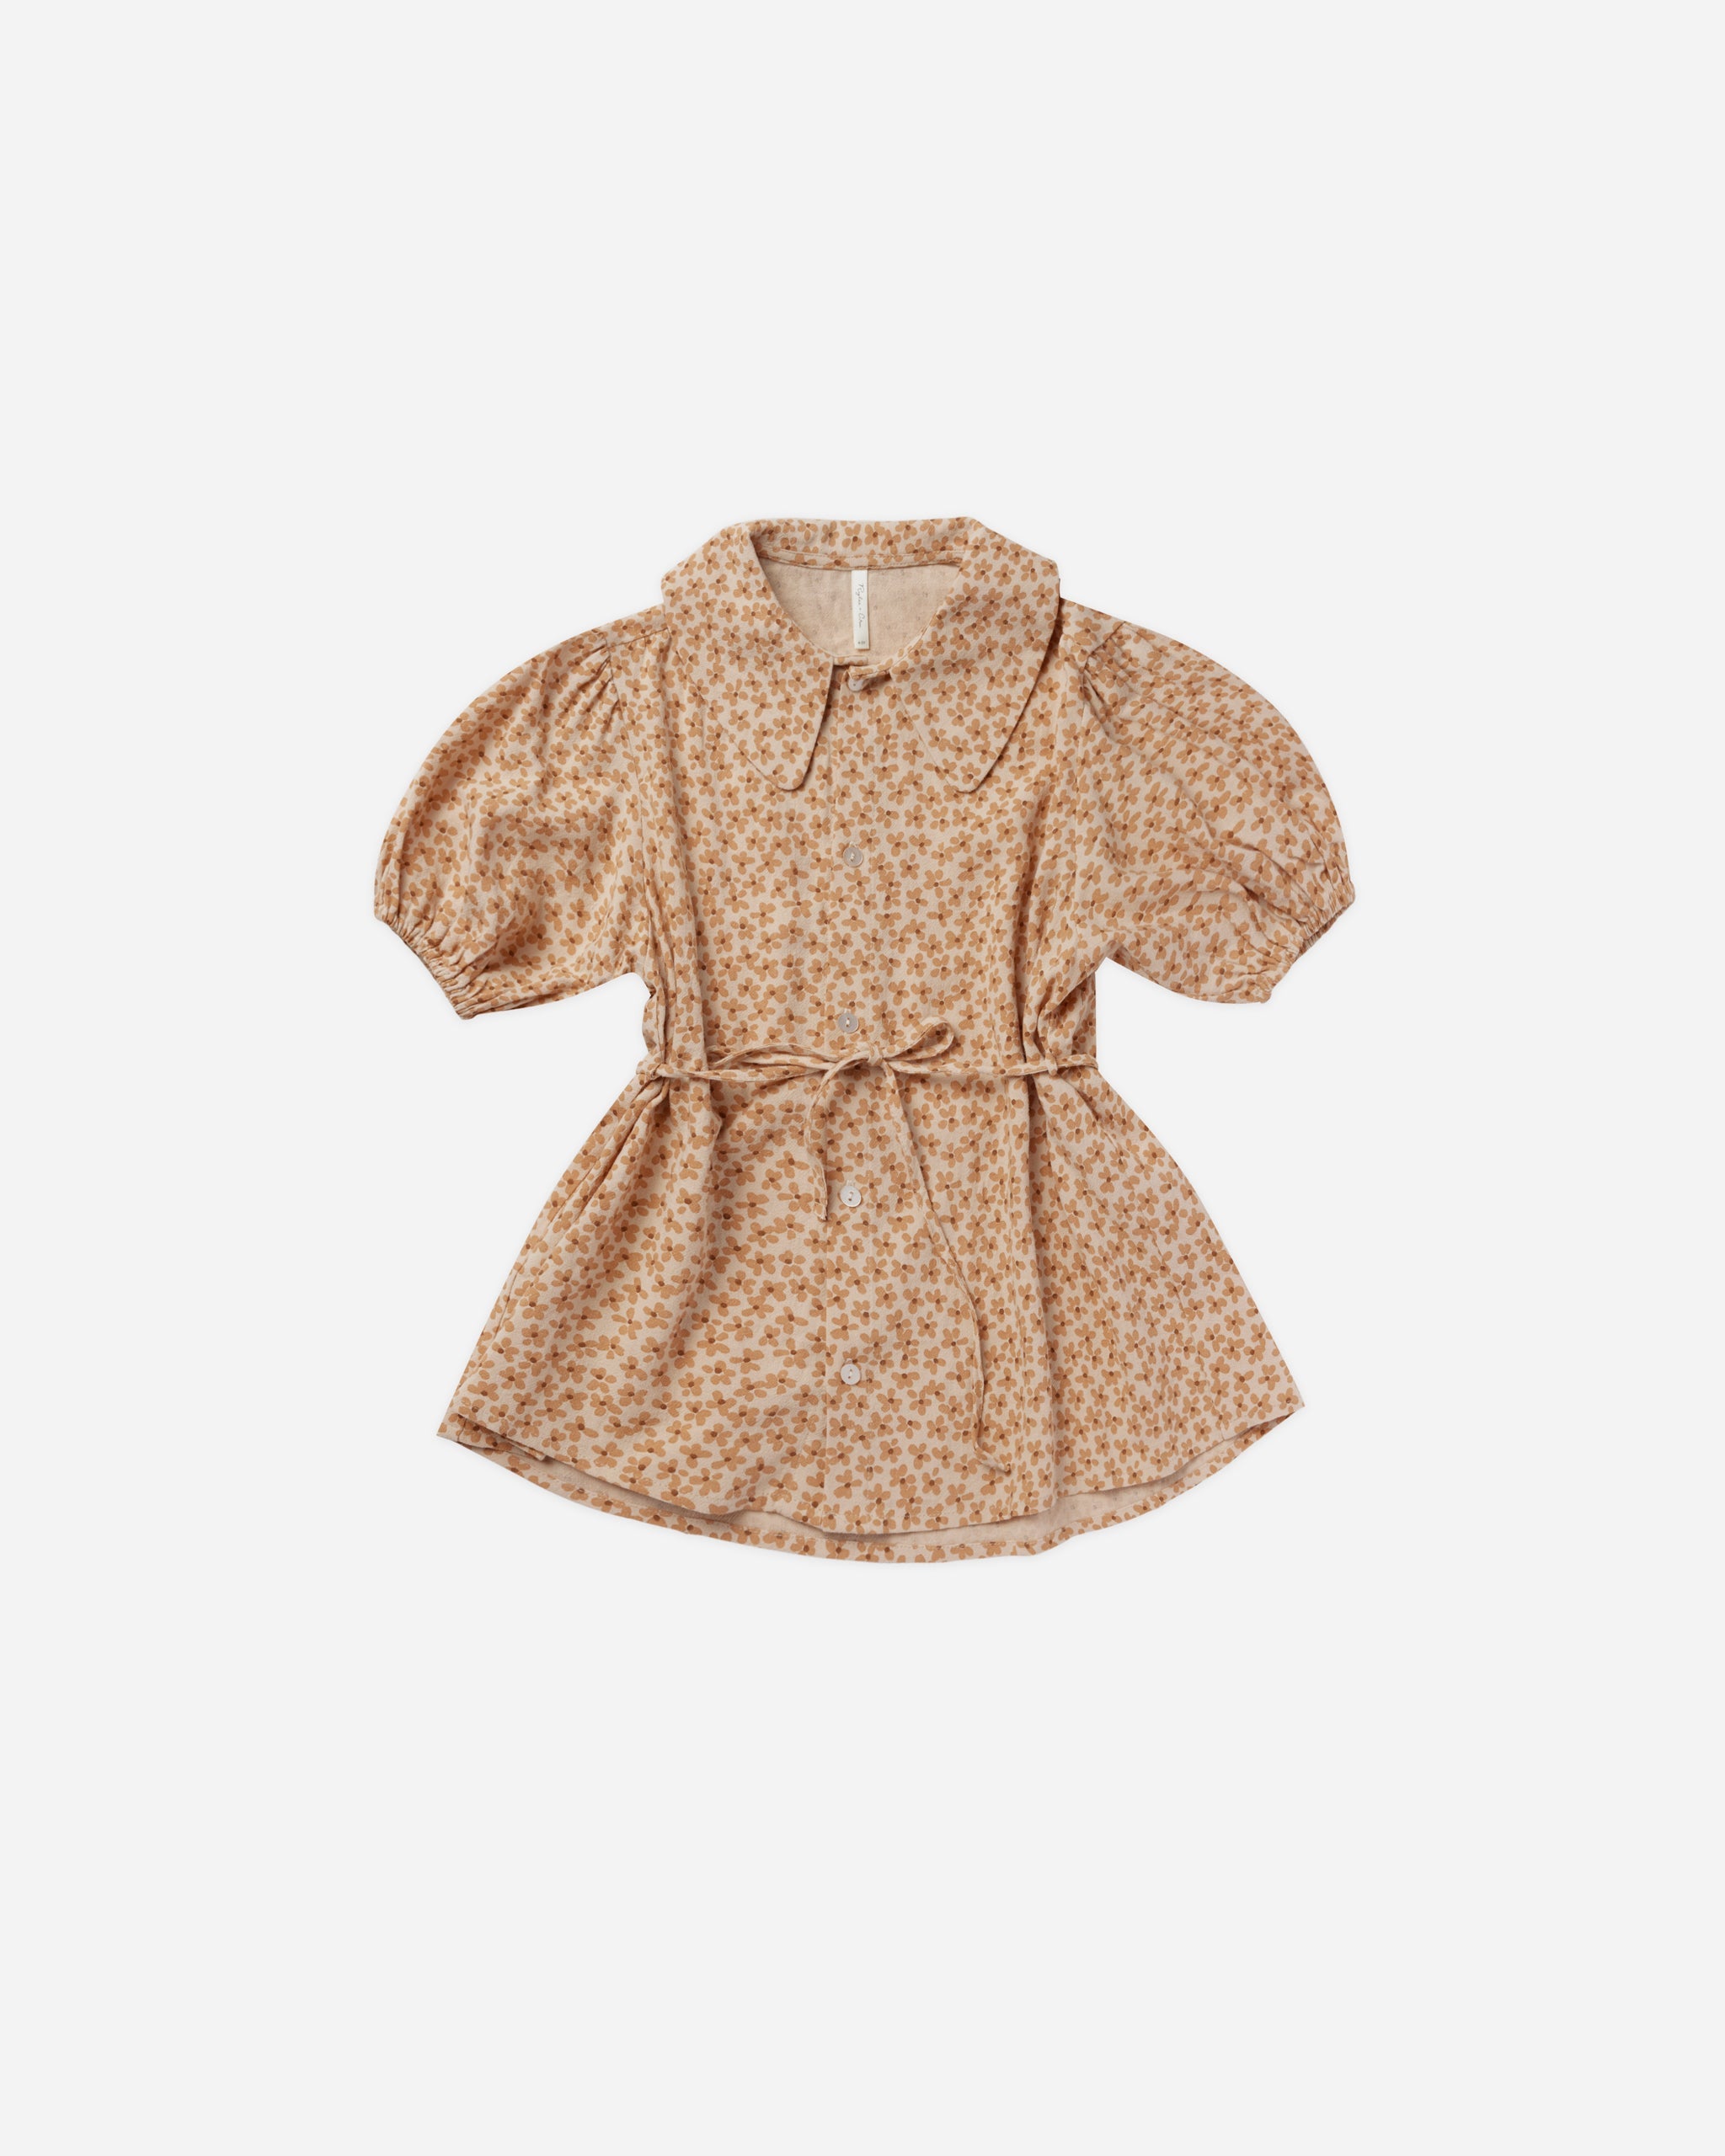 Olive Dress || Primrose - Rylee + Cru | Kids Clothes | Trendy Baby Clothes | Modern Infant Outfits |